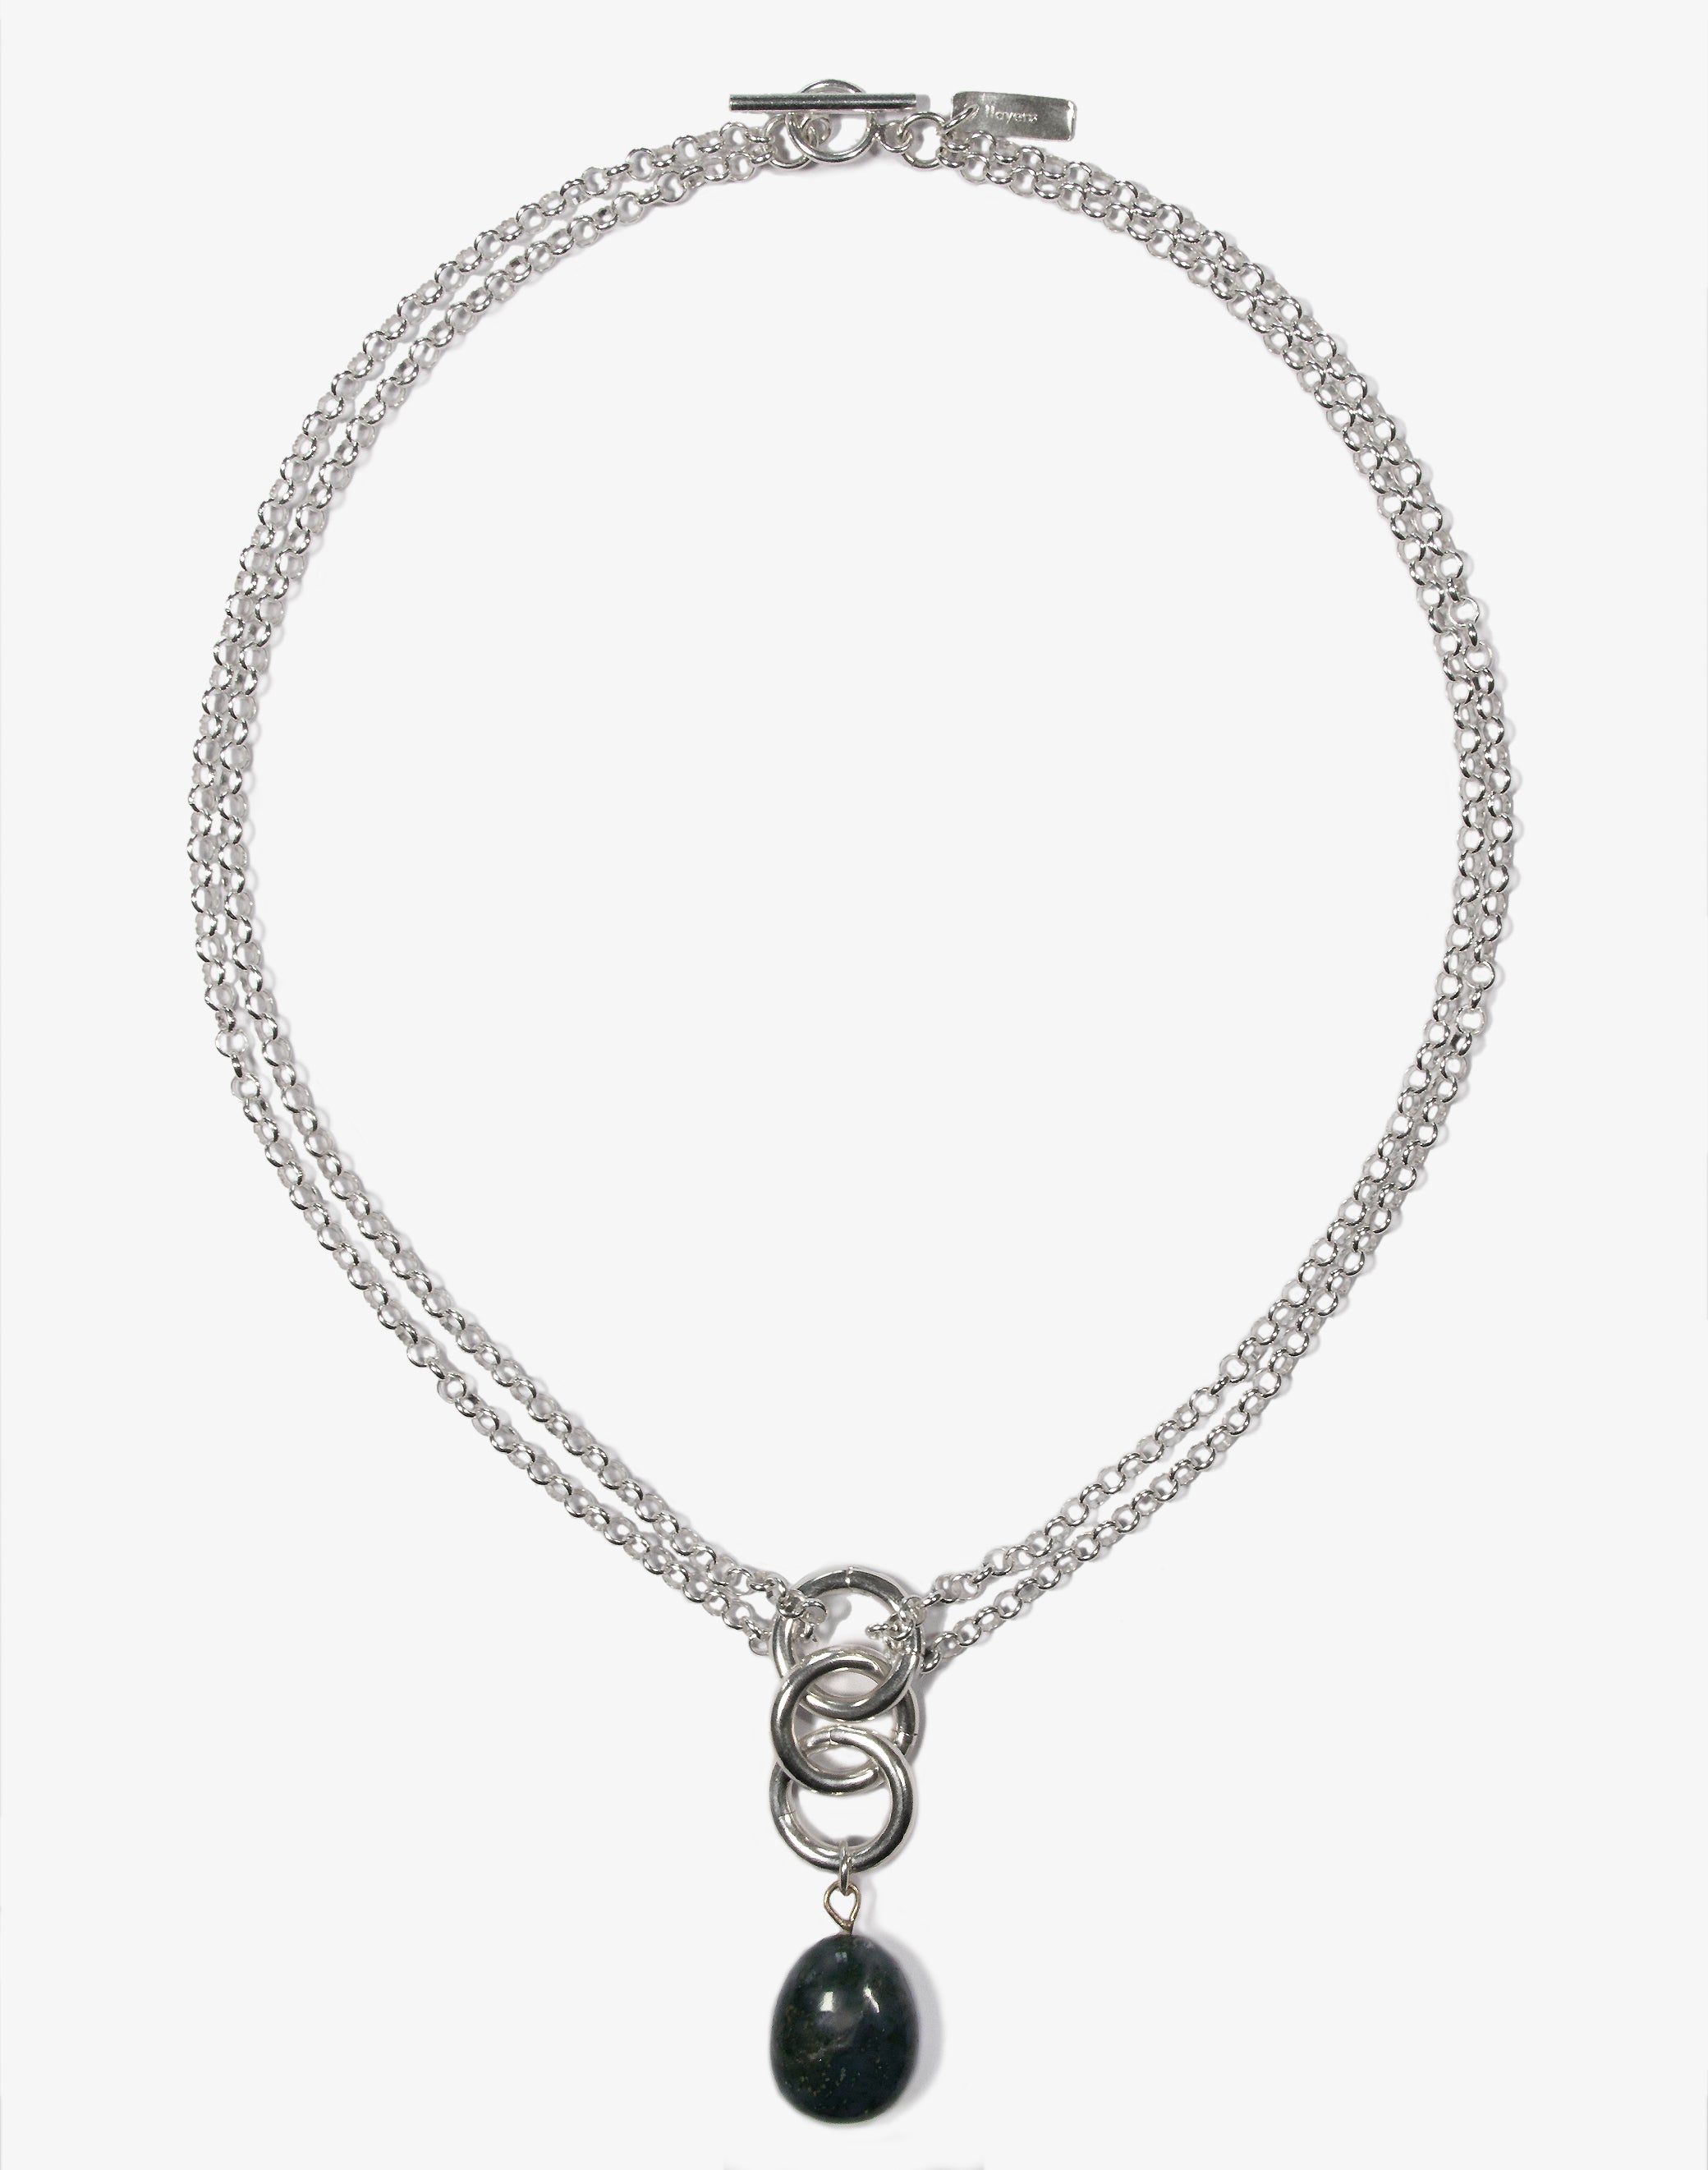 llayers jewelry unite Women silver chain rings choker necklace-stones-- Made In Brookyn New York 3